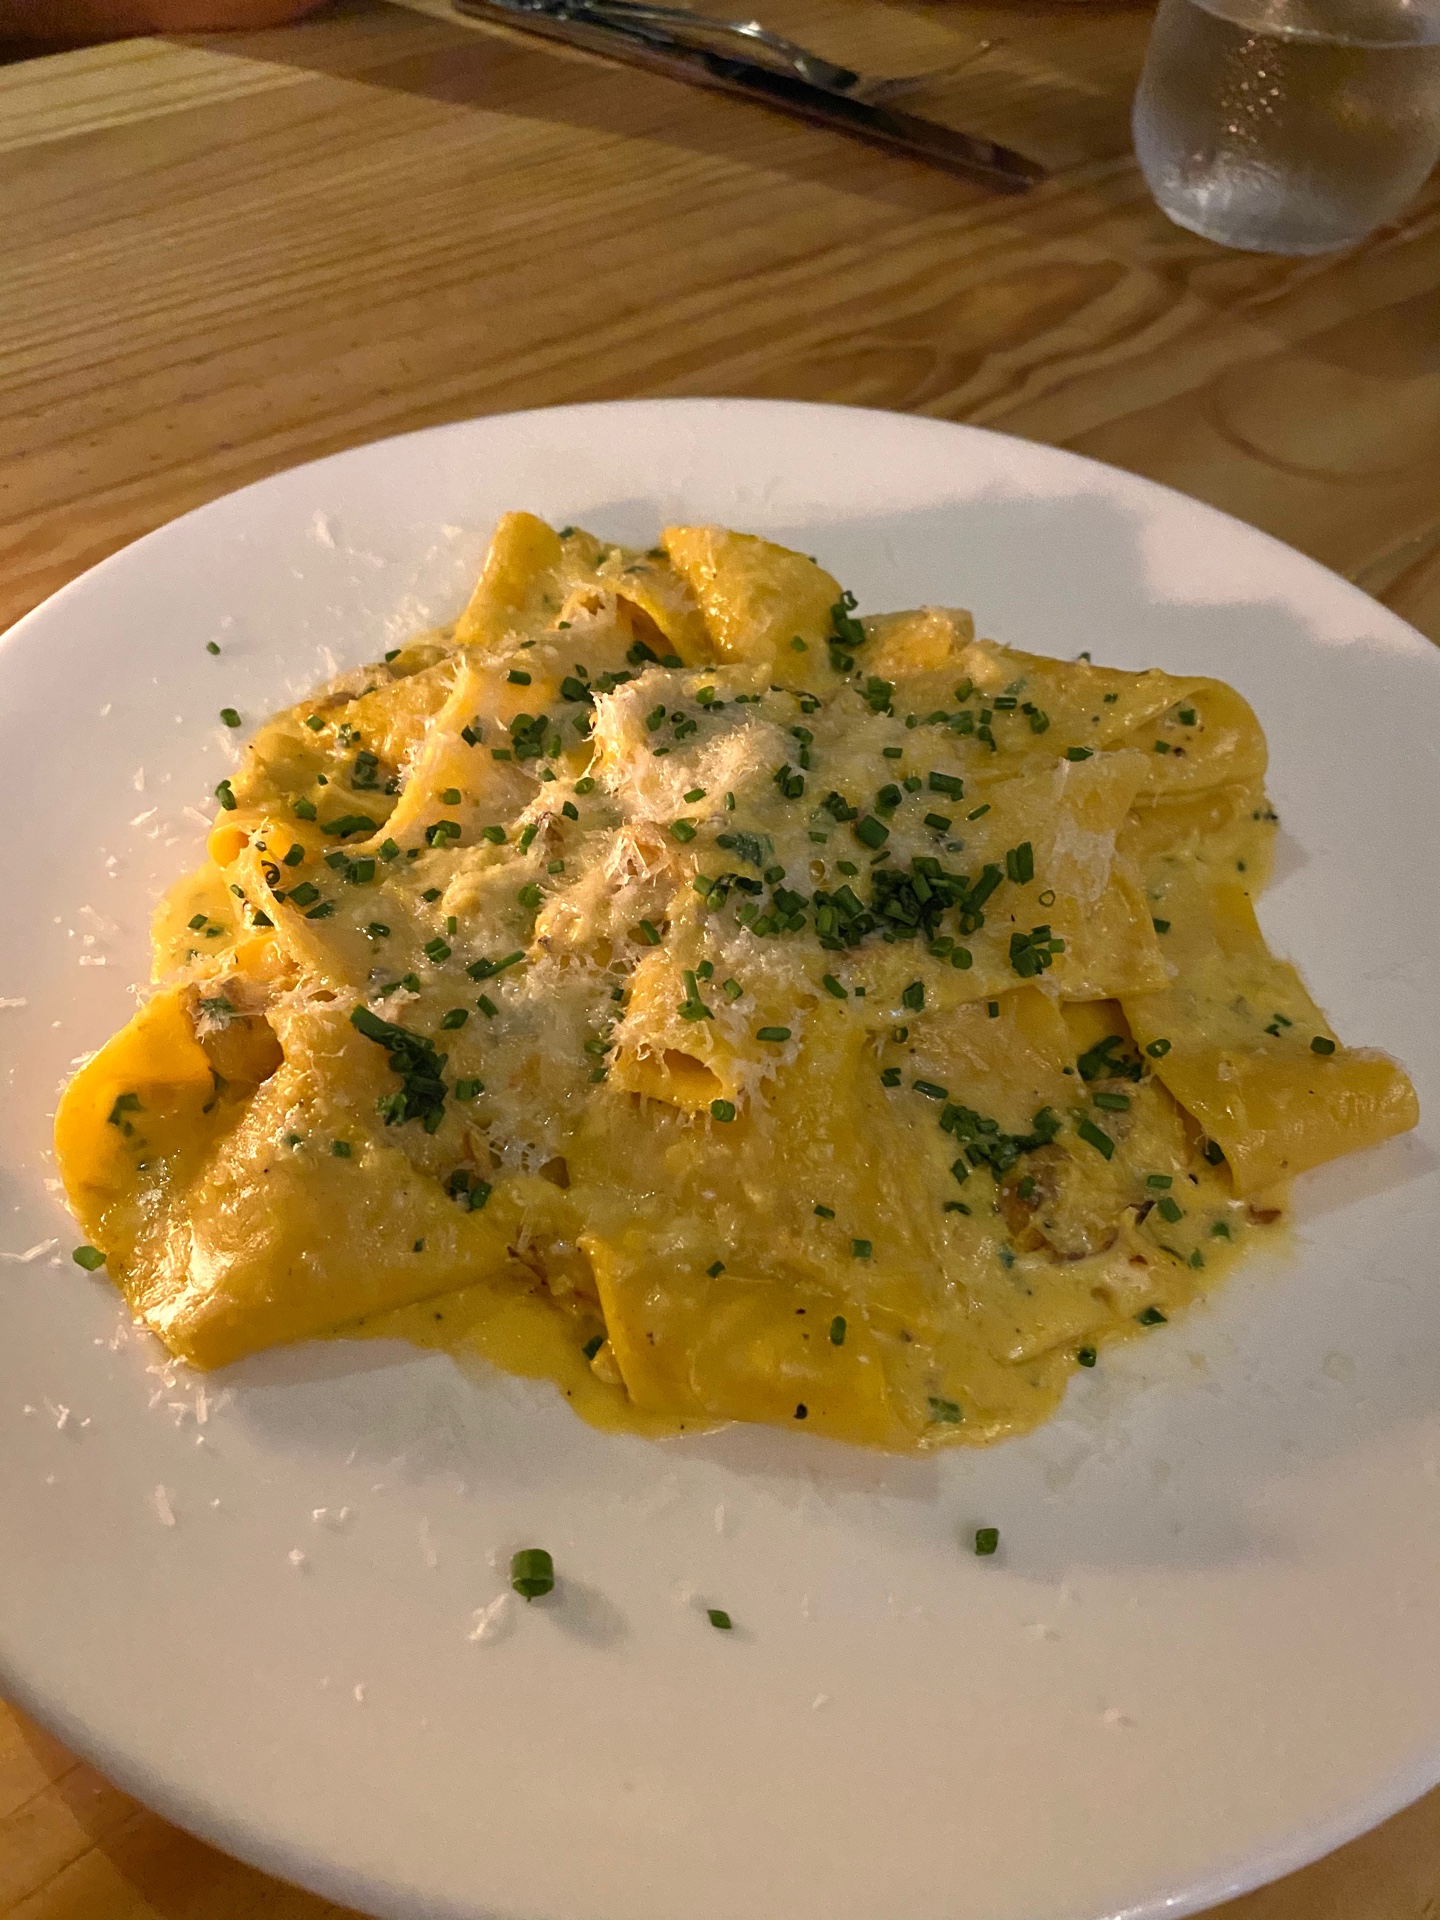 Pappardelle at Pasta Bar | Burpple